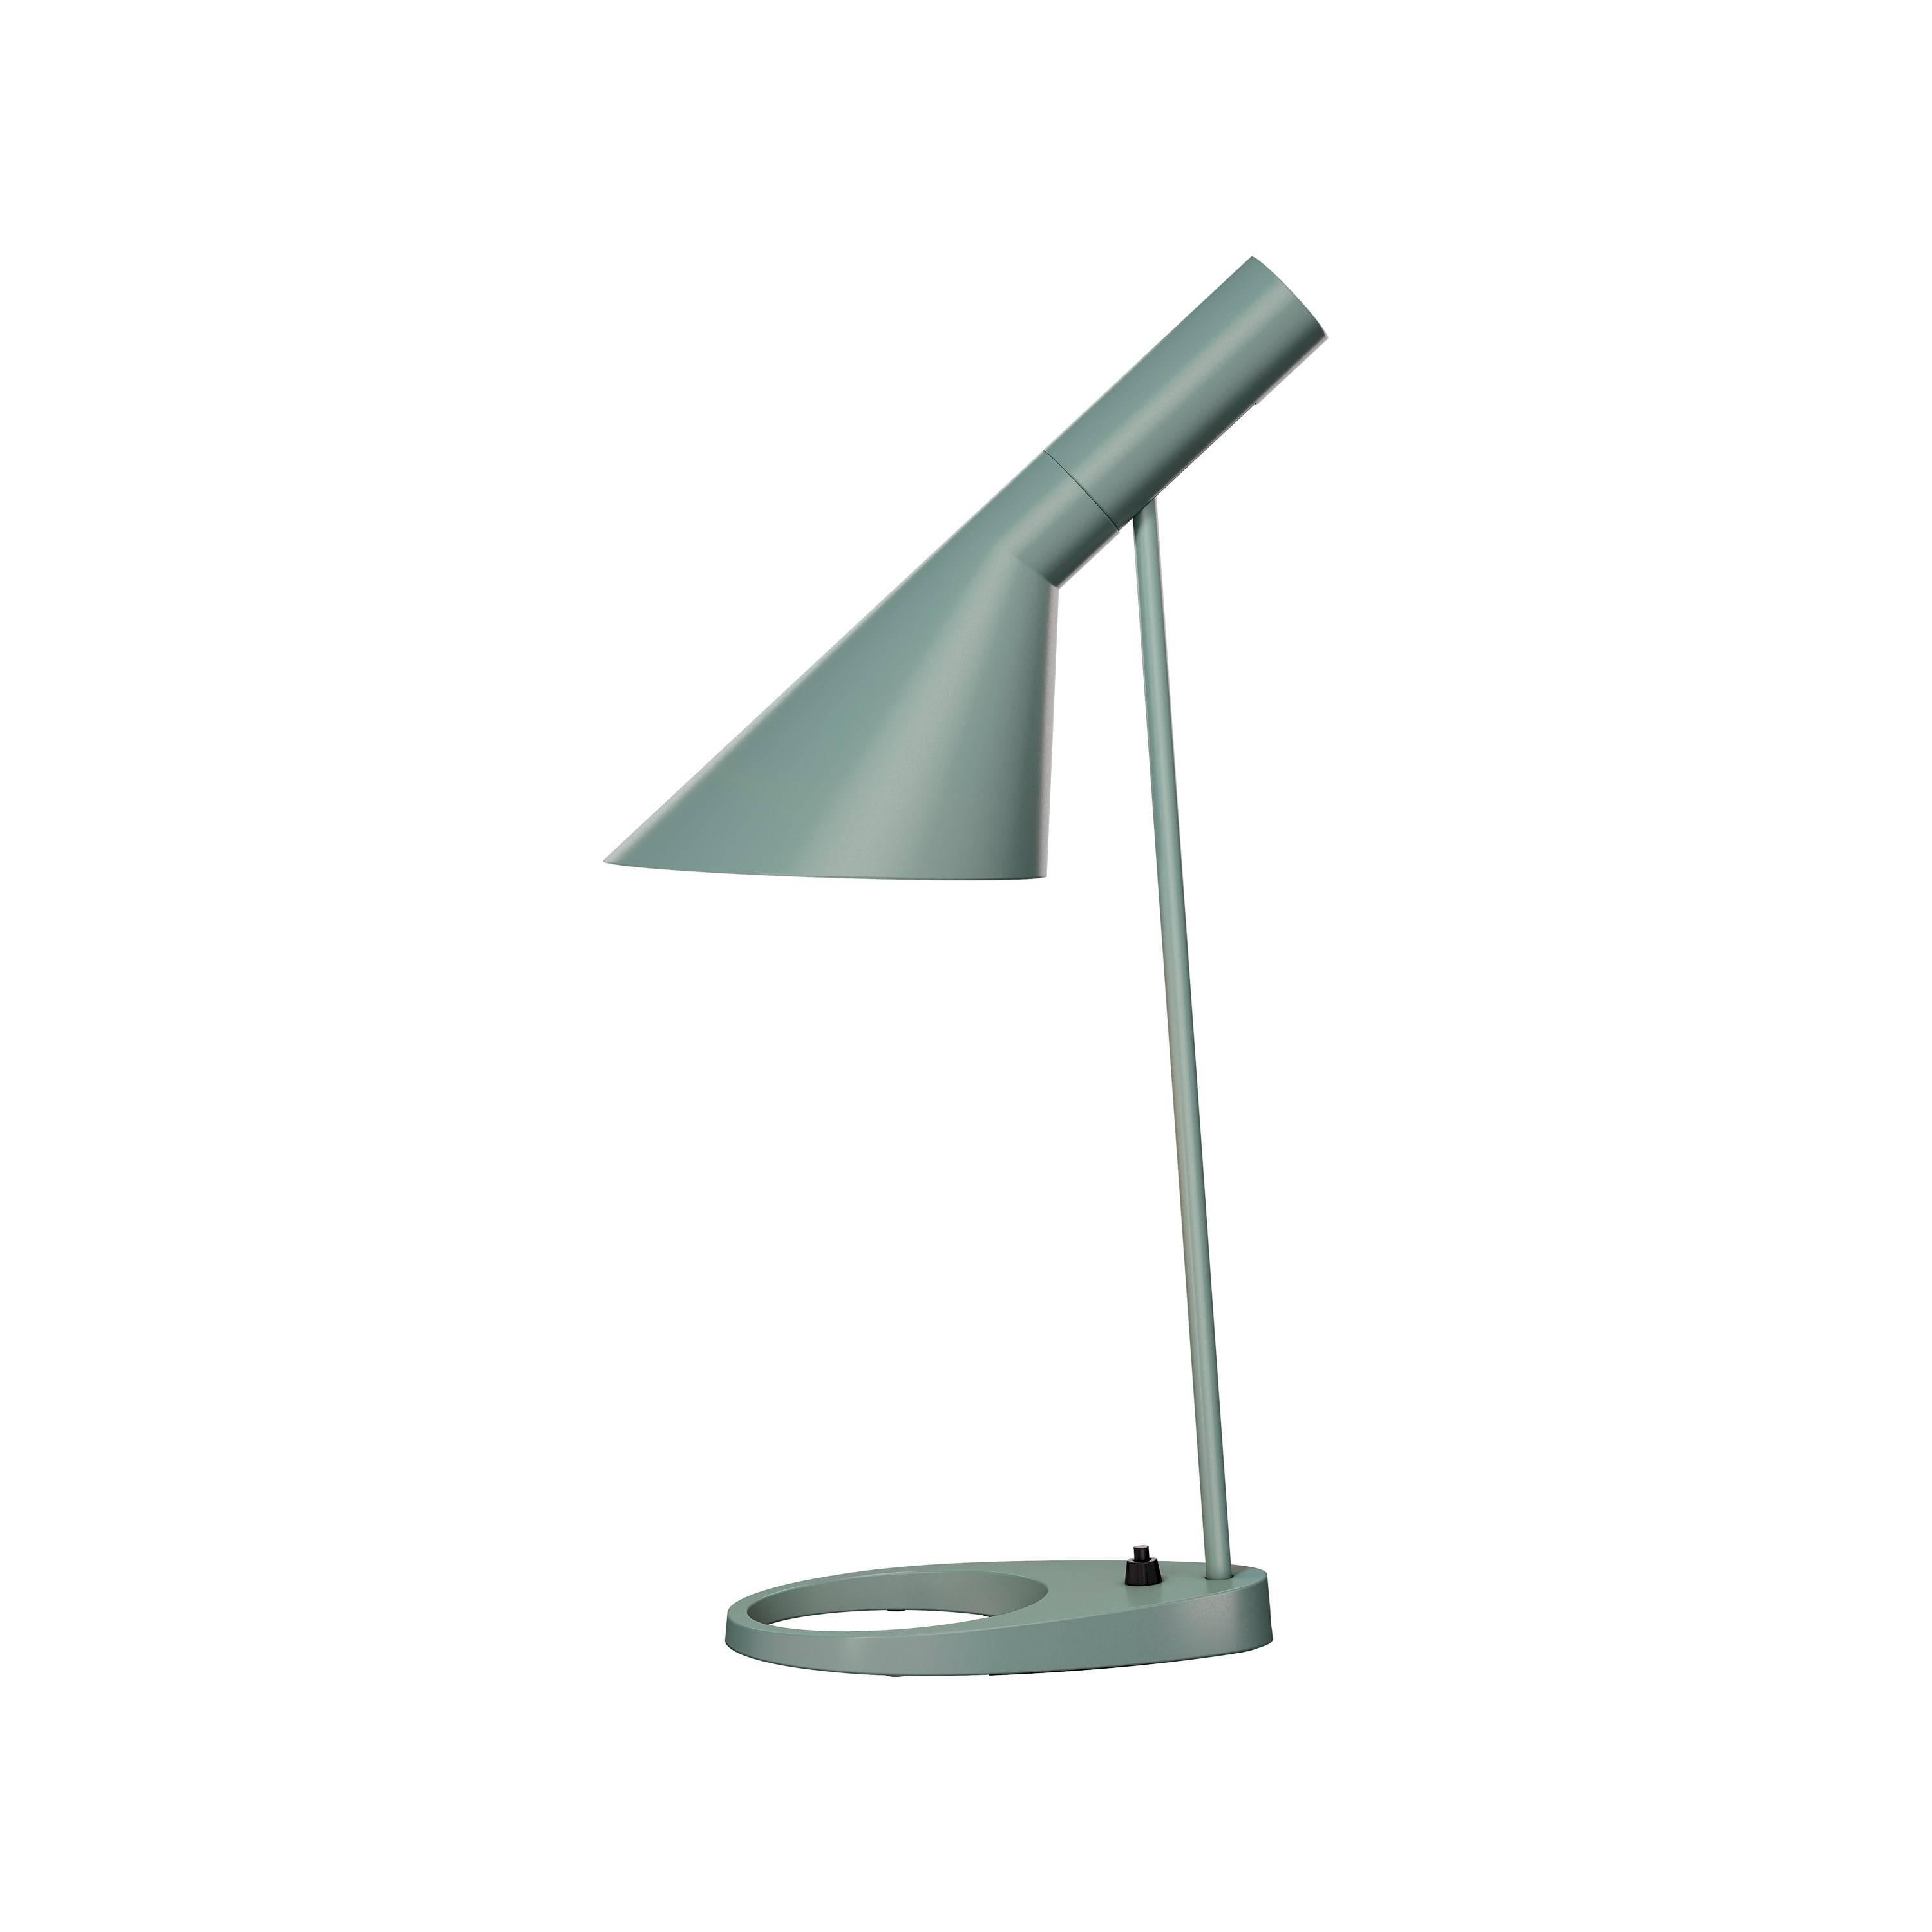 Arne Jacobsen AJ Table Lamp in Warm Grey for Louis Poulsen In New Condition For Sale In Glendale, CA